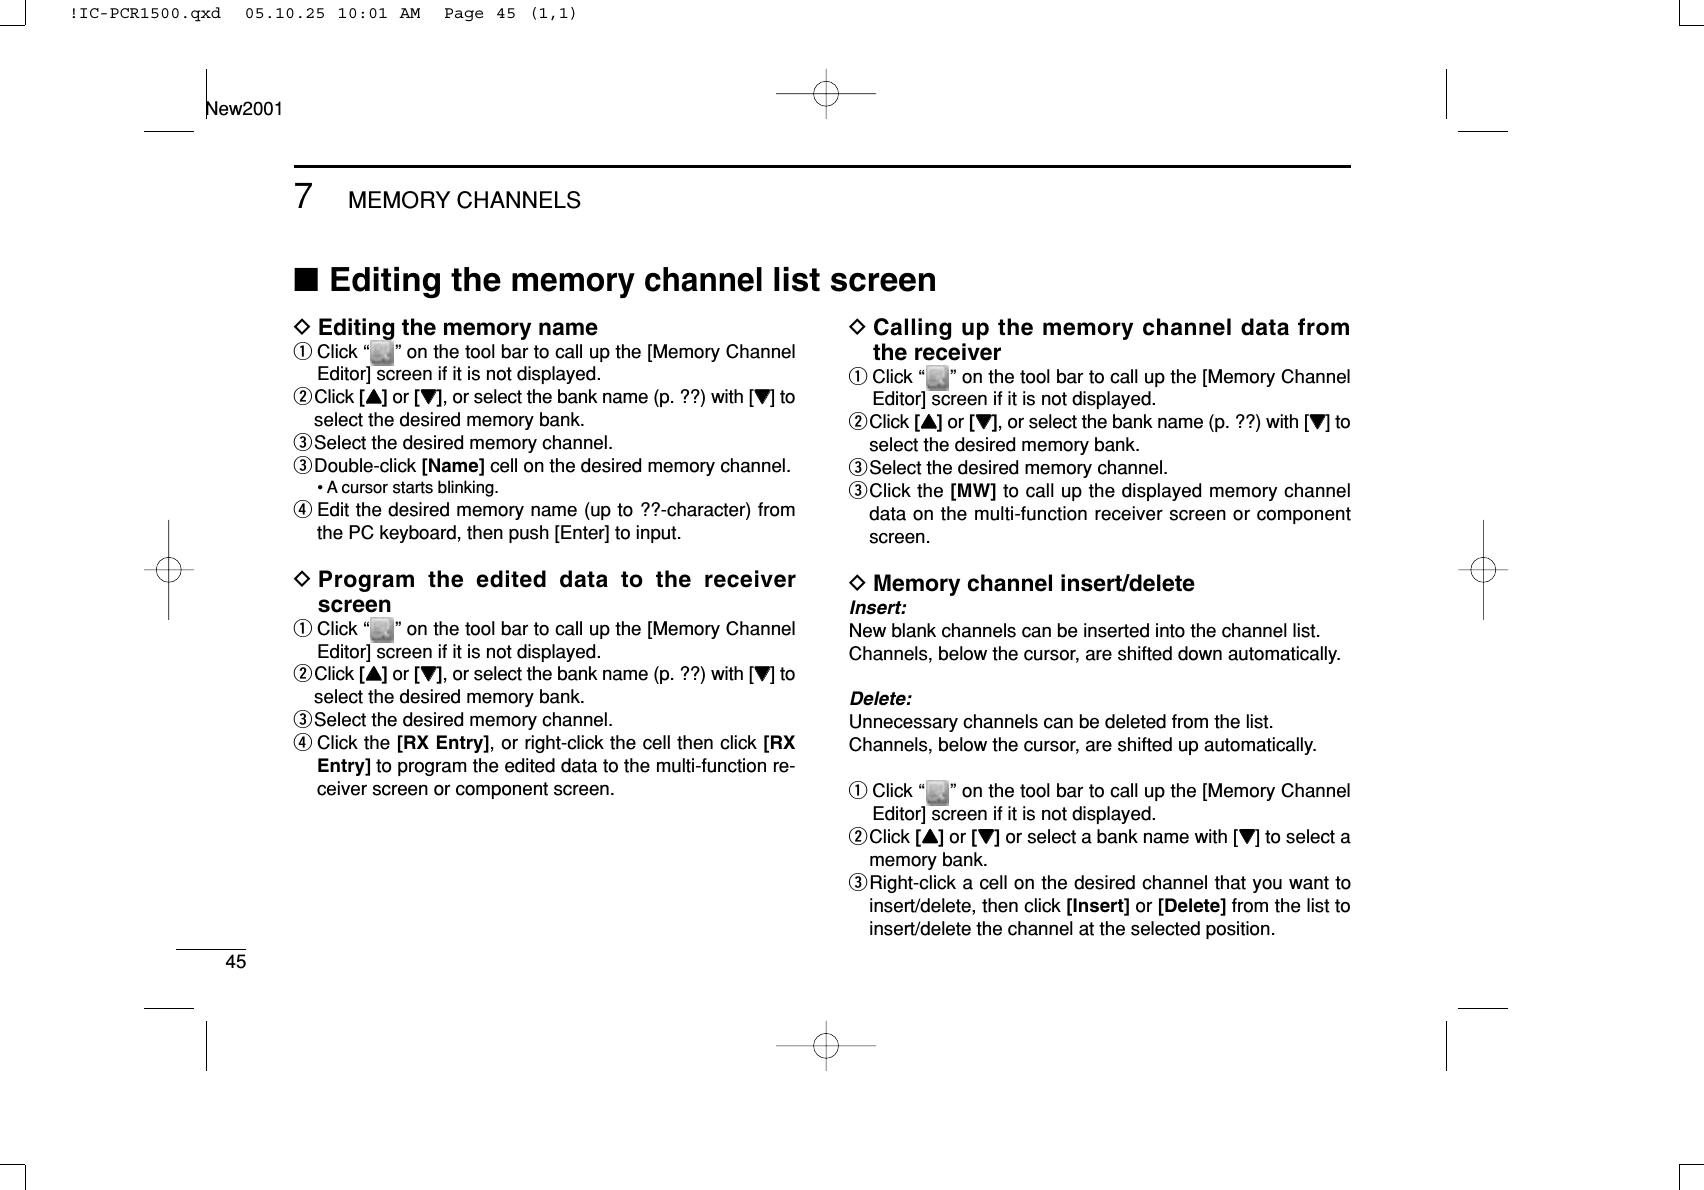 457MEMORY CHANNELSNew2001DEditing the memory nameqClick “ ” on the tool bar to call up the [Memory ChannelEditor] screen if it is not displayed.wClick [YY]or [ZZ], or select the bank name (p. ??) with [ZZ] toselect the desired memory bank.eSelect the desired memory channel.eDouble-click [Name] cell on the desired memory channel.• A cursor starts blinking.rEdit the desired memory name (up to ??-character) fromthe PC keyboard, then push [Enter] to input.DProgram the edited data to the receiverscreenqClick “ ” on the tool bar to call up the [Memory ChannelEditor] screen if it is not displayed.wClick [YY]or [ZZ], or select the bank name (p. ??) with [ZZ] toselect the desired memory bank.eSelect the desired memory channel.rClick the [RX Entry], or right-click the cell then click [RXEntry] to program the edited data to the multi-function re-ceiver screen or component screen.DCalling up the memory channel data fromthe receiverqClick “ ” on the tool bar to call up the [Memory ChannelEditor] screen if it is not displayed.wClick [YY]or [ZZ], or select the bank name (p. ??) with [ZZ] toselect the desired memory bank.eSelect the desired memory channel.eClick the [MW] to call up the displayed memory channeldata on the multi-function receiver screen or componentscreen.DMemory channel insert/deleteInsert:New blank channels can be inserted into the channel list.Channels, below the cursor, are shifted down automatically.Delete:Unnecessary channels can be deleted from the list.Channels, below the cursor, are shifted up automatically.qClick “ ” on the tool bar to call up the [Memory ChannelEditor] screen if it is not displayed.wClick [YY]or [ZZ]or select a bank name with [ZZ] to select amemory bank.eRight-click a cell on the desired channel that you want toinsert/delete, then click [Insert] or [Delete] from the list toinsert/delete the channel at the selected position.■Editing the memory channel list screen!IC-PCR1500.qxd  05.10.25 10:01 AM  Page 45 (1,1)